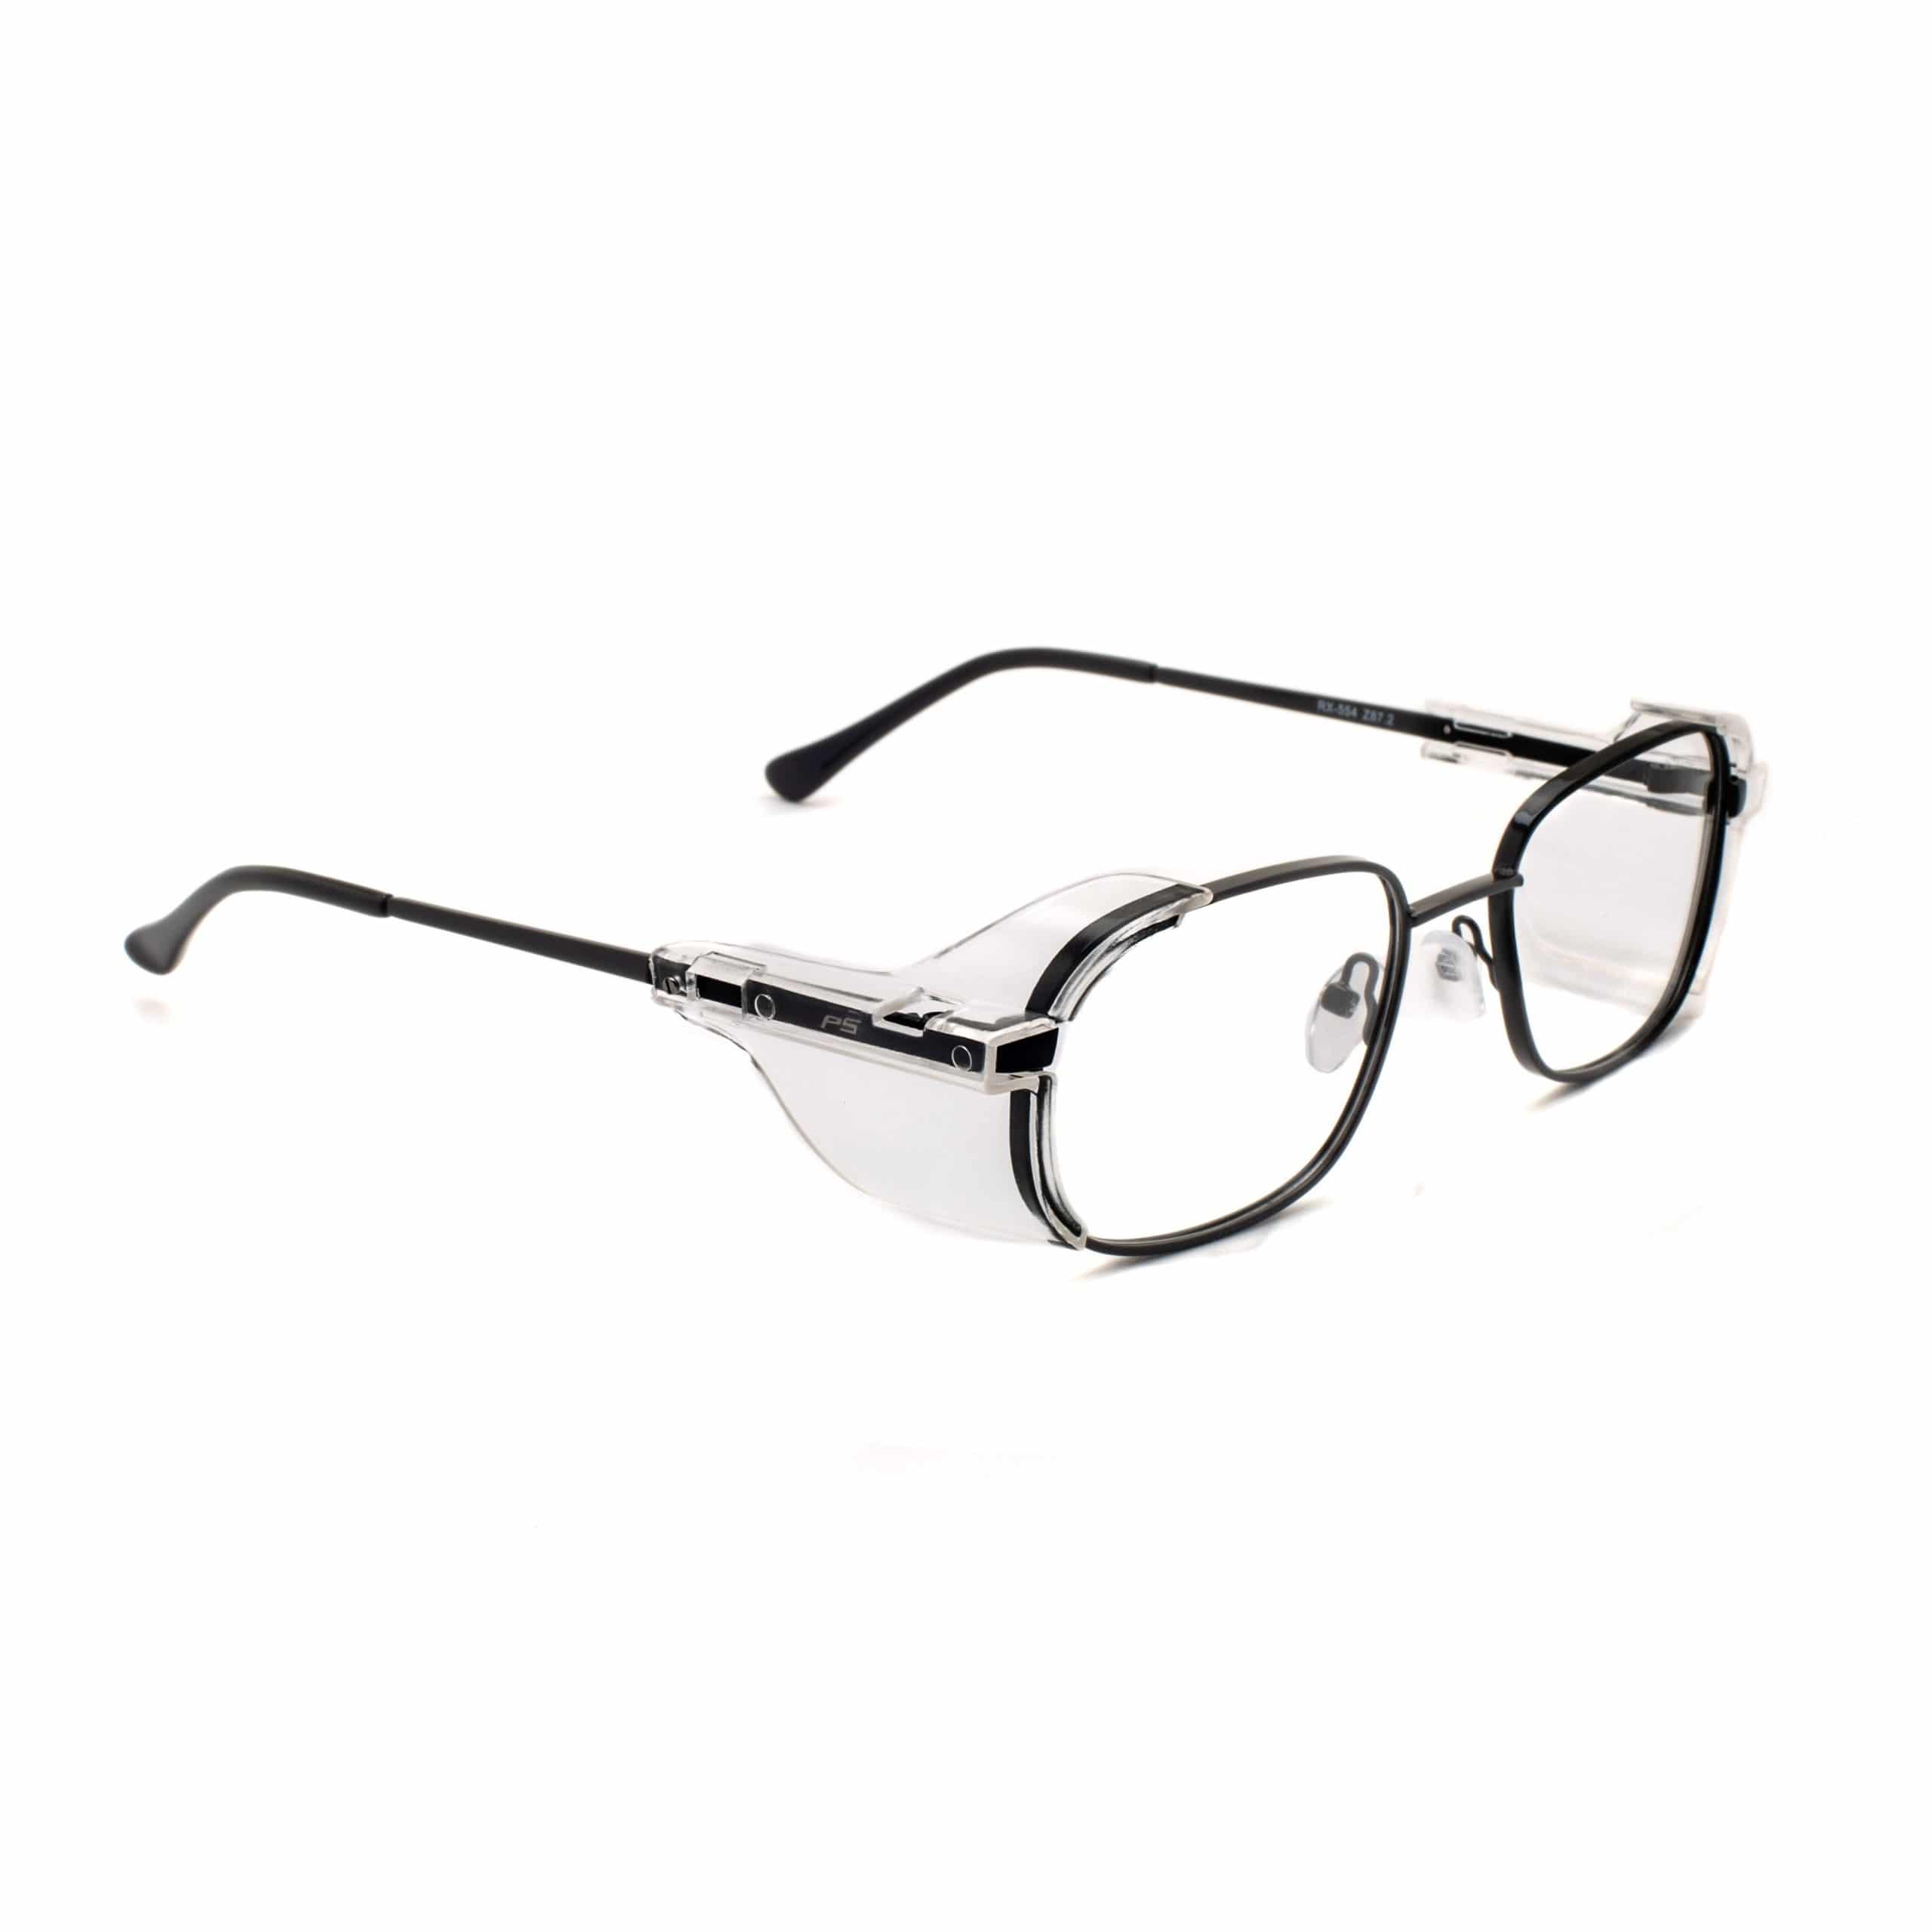 Prescription Safety Glasses RX-554 - Safety Protection Glasses